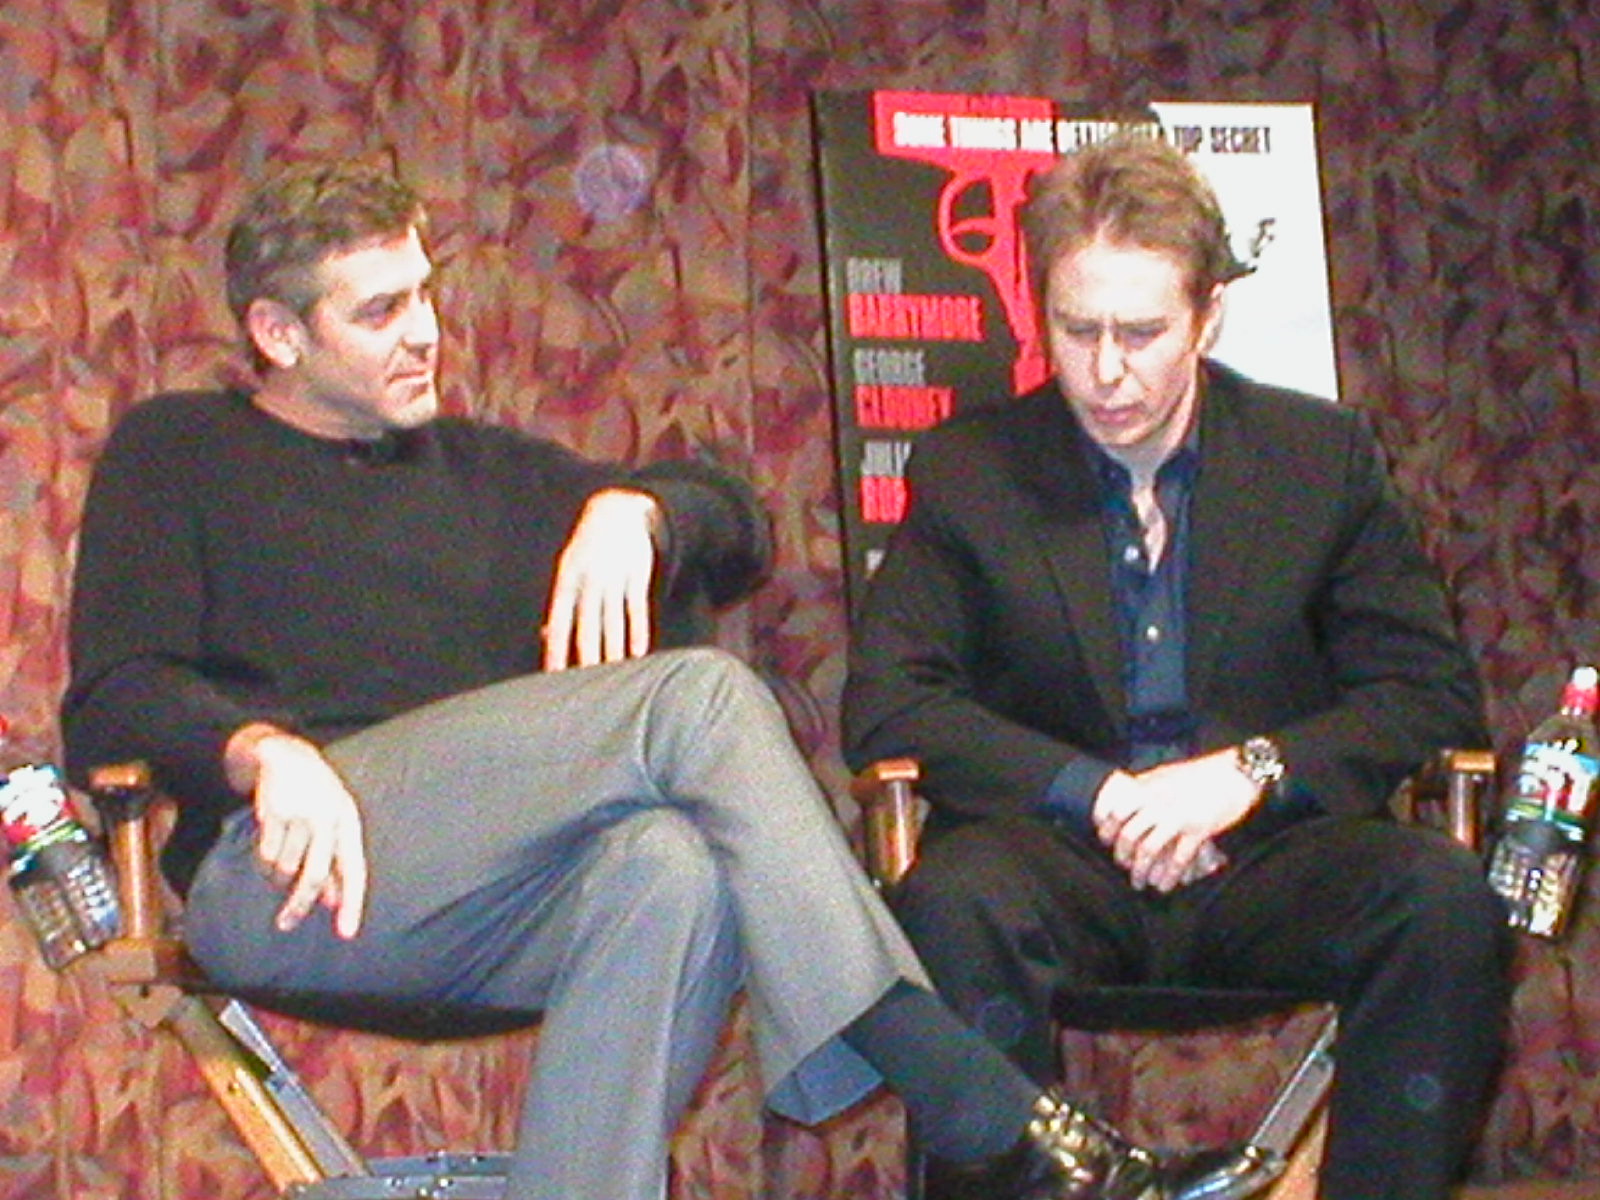 George Clooney and Sam Rockwell at Los Angeles Conversations screening/Q&A produced by Bob Nuchow